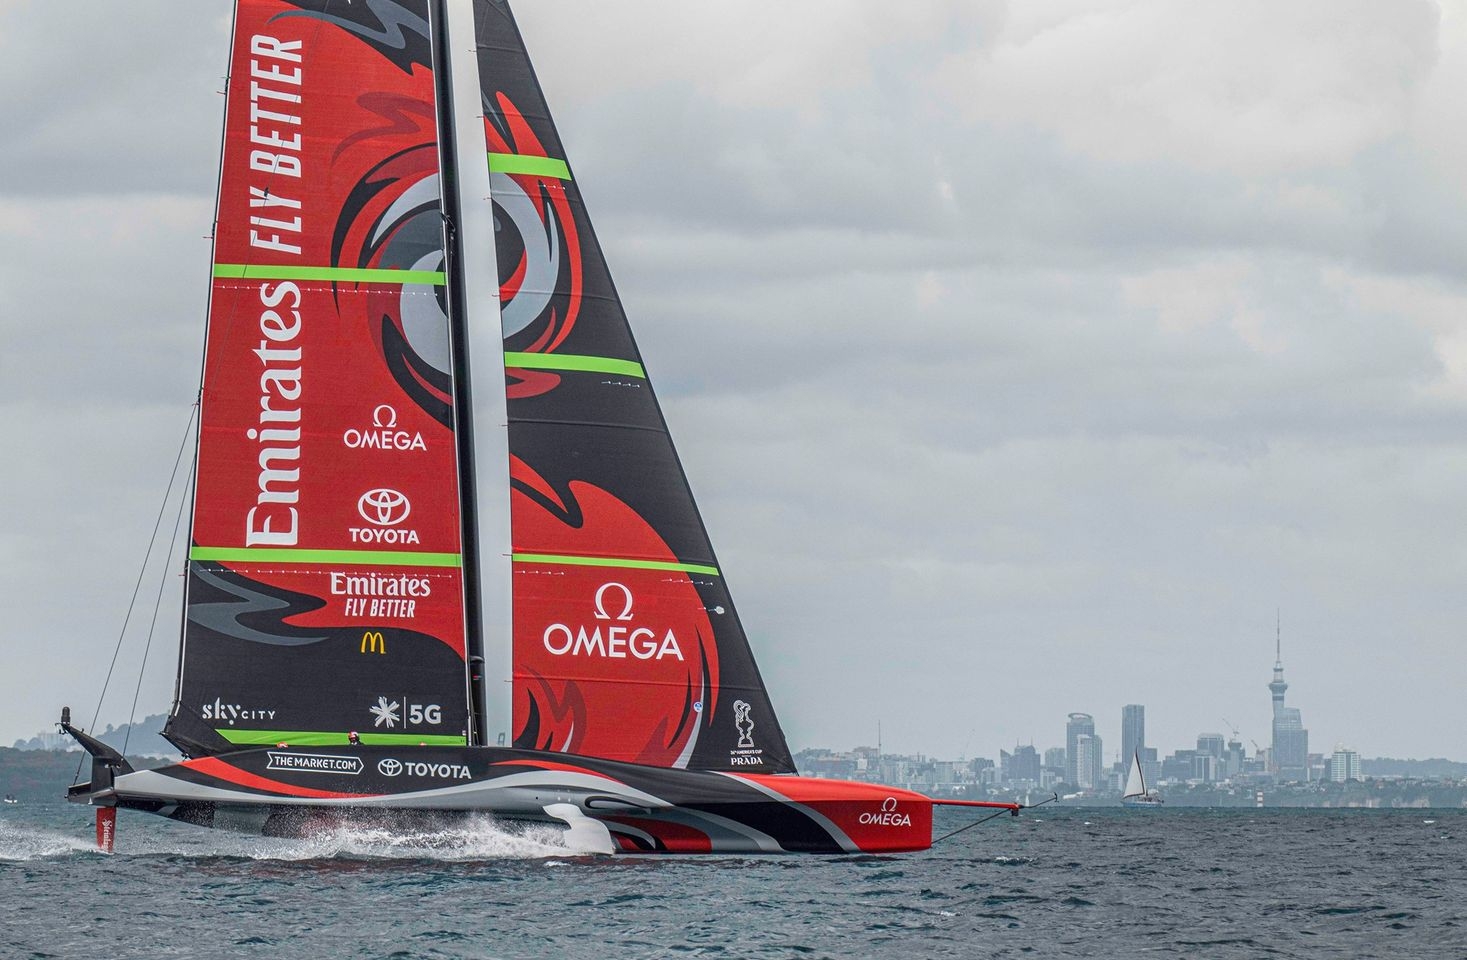  America's Cup News  Premiers tests reussi pour Team NZL